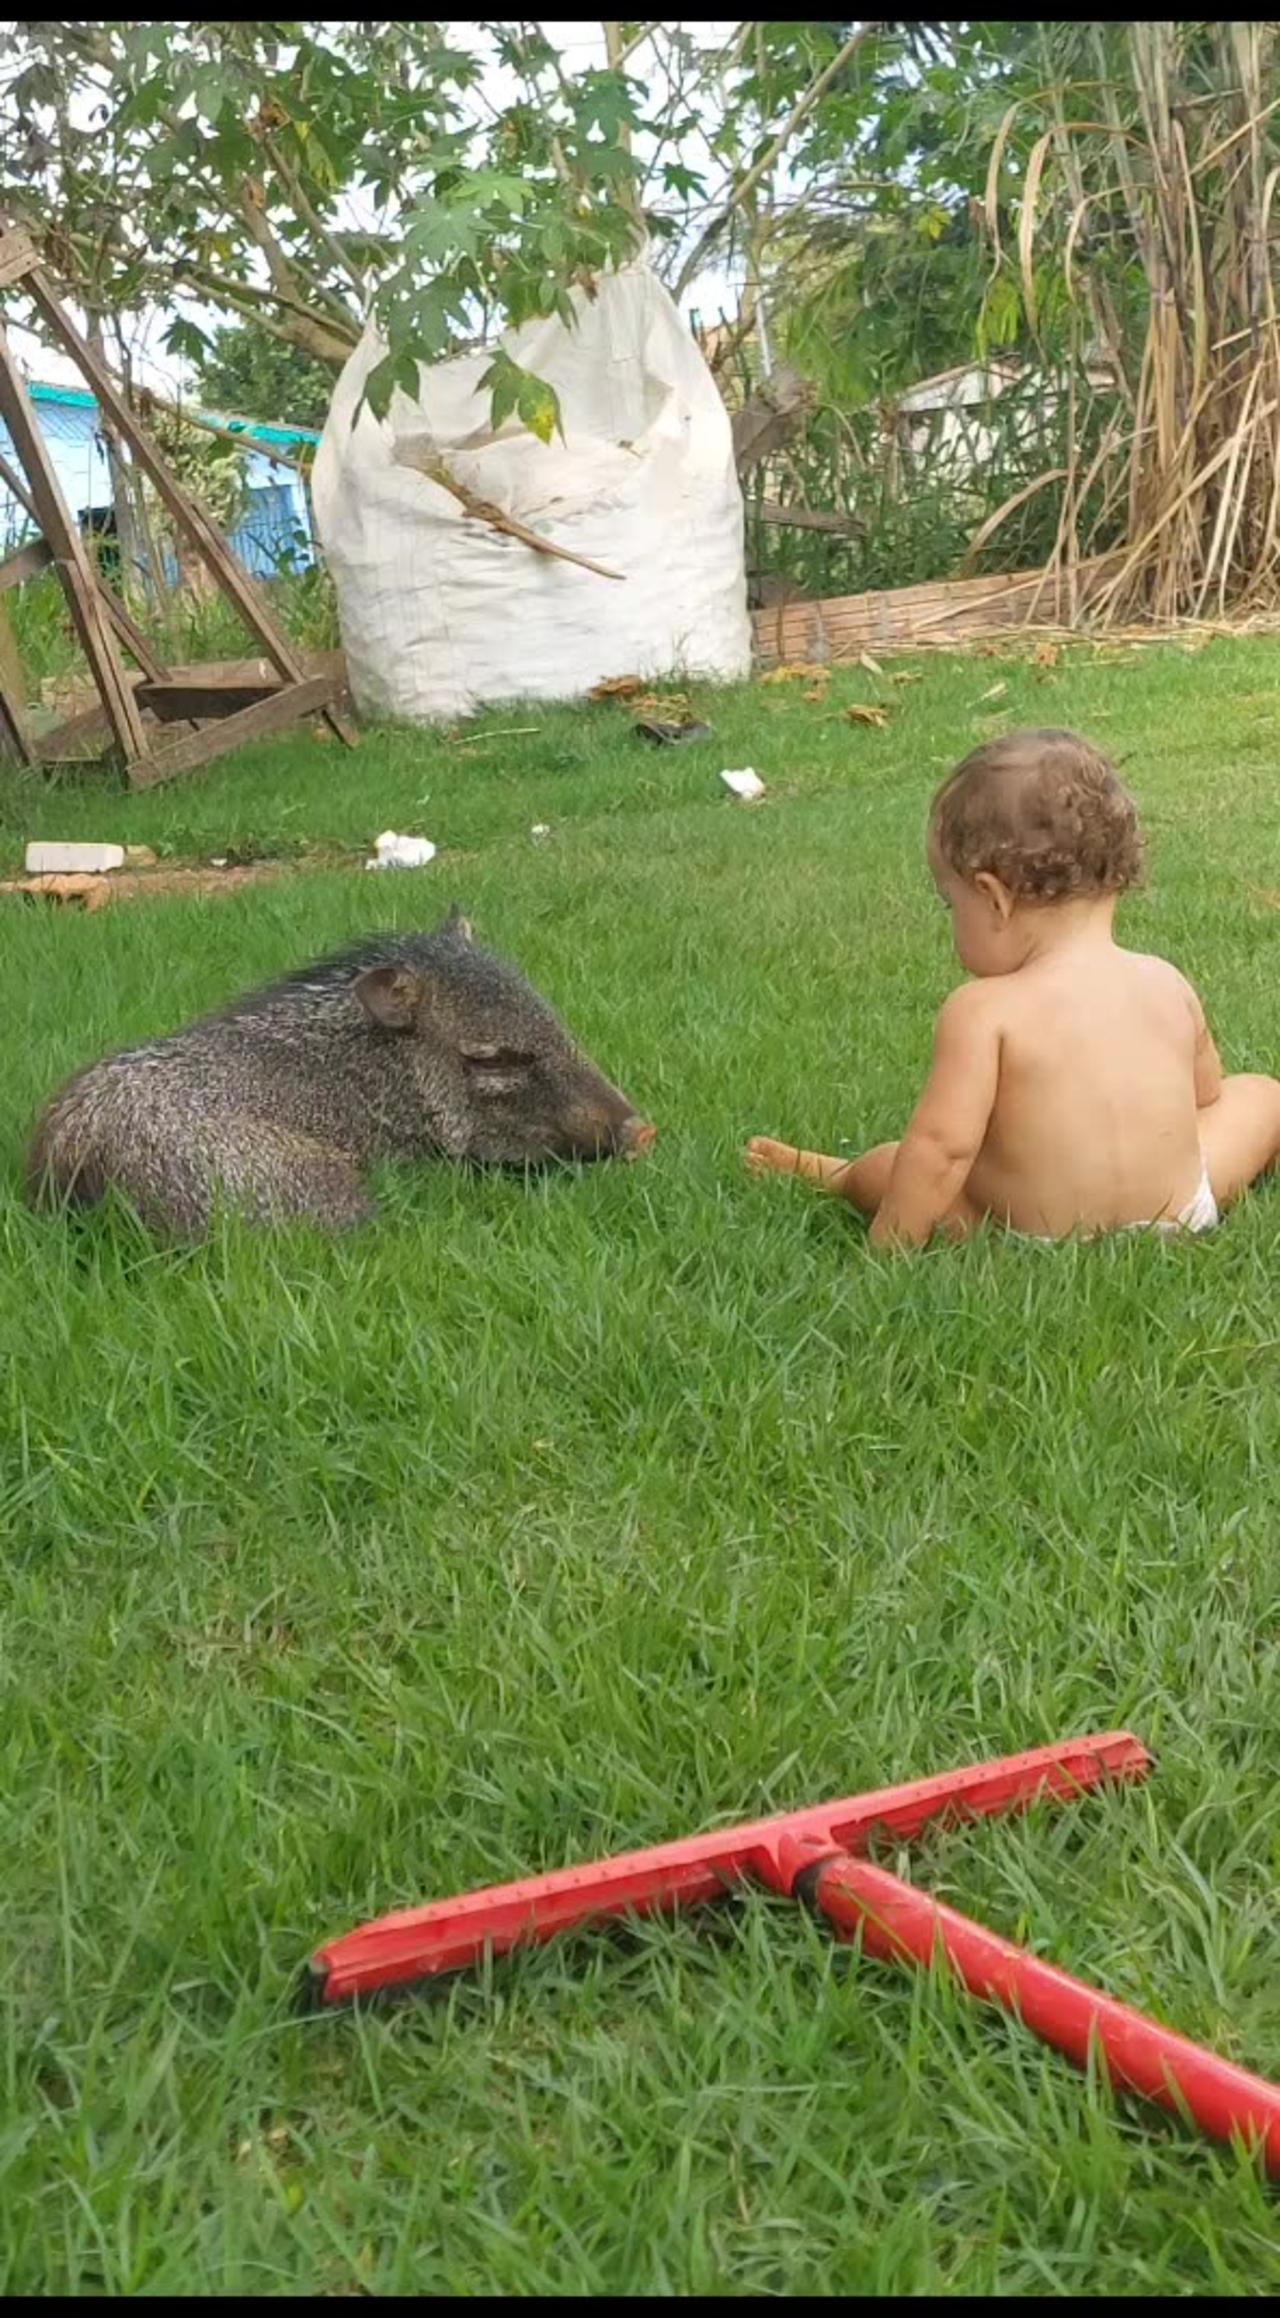 A Kiddo and Piglet's Day Out